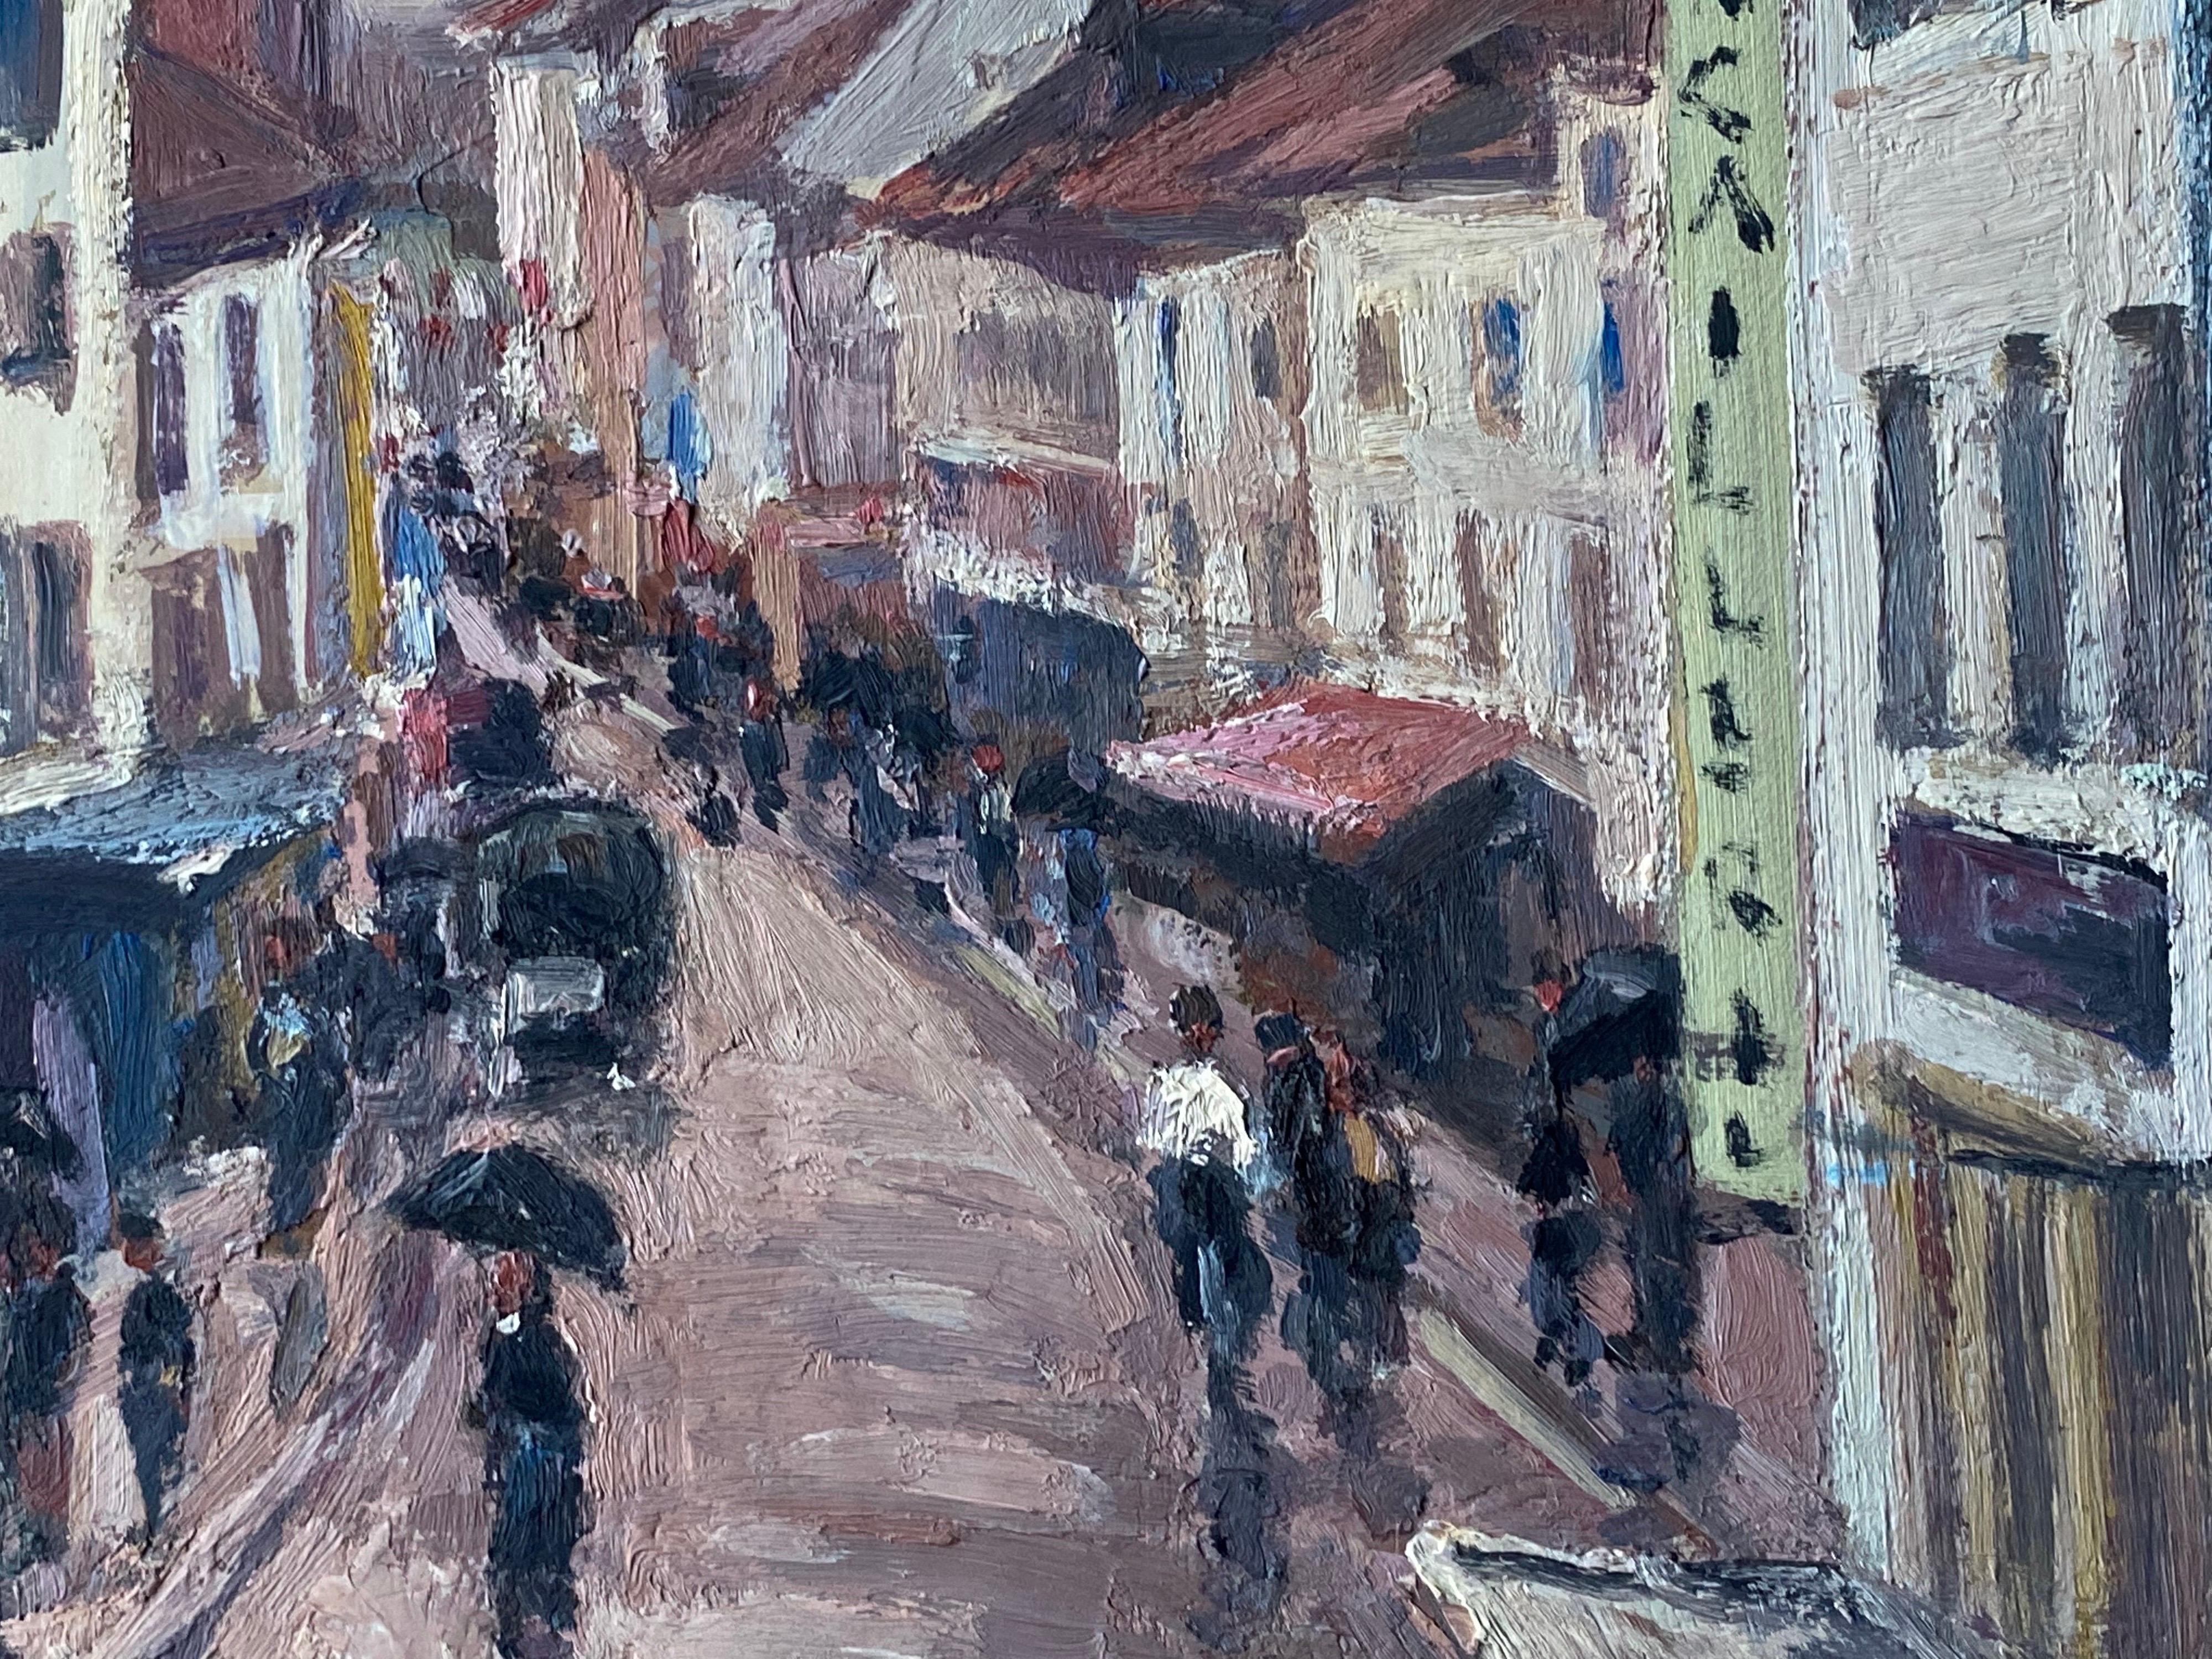 Artist/ School: Leon Hatot (French 1883-1953), signed lower corner

Title: Impressionist oil painting depicting a busy French market town scene with figures walking in the rain (umbrellas)

Medium: oil painting on thick paper, unframed.

Size: 